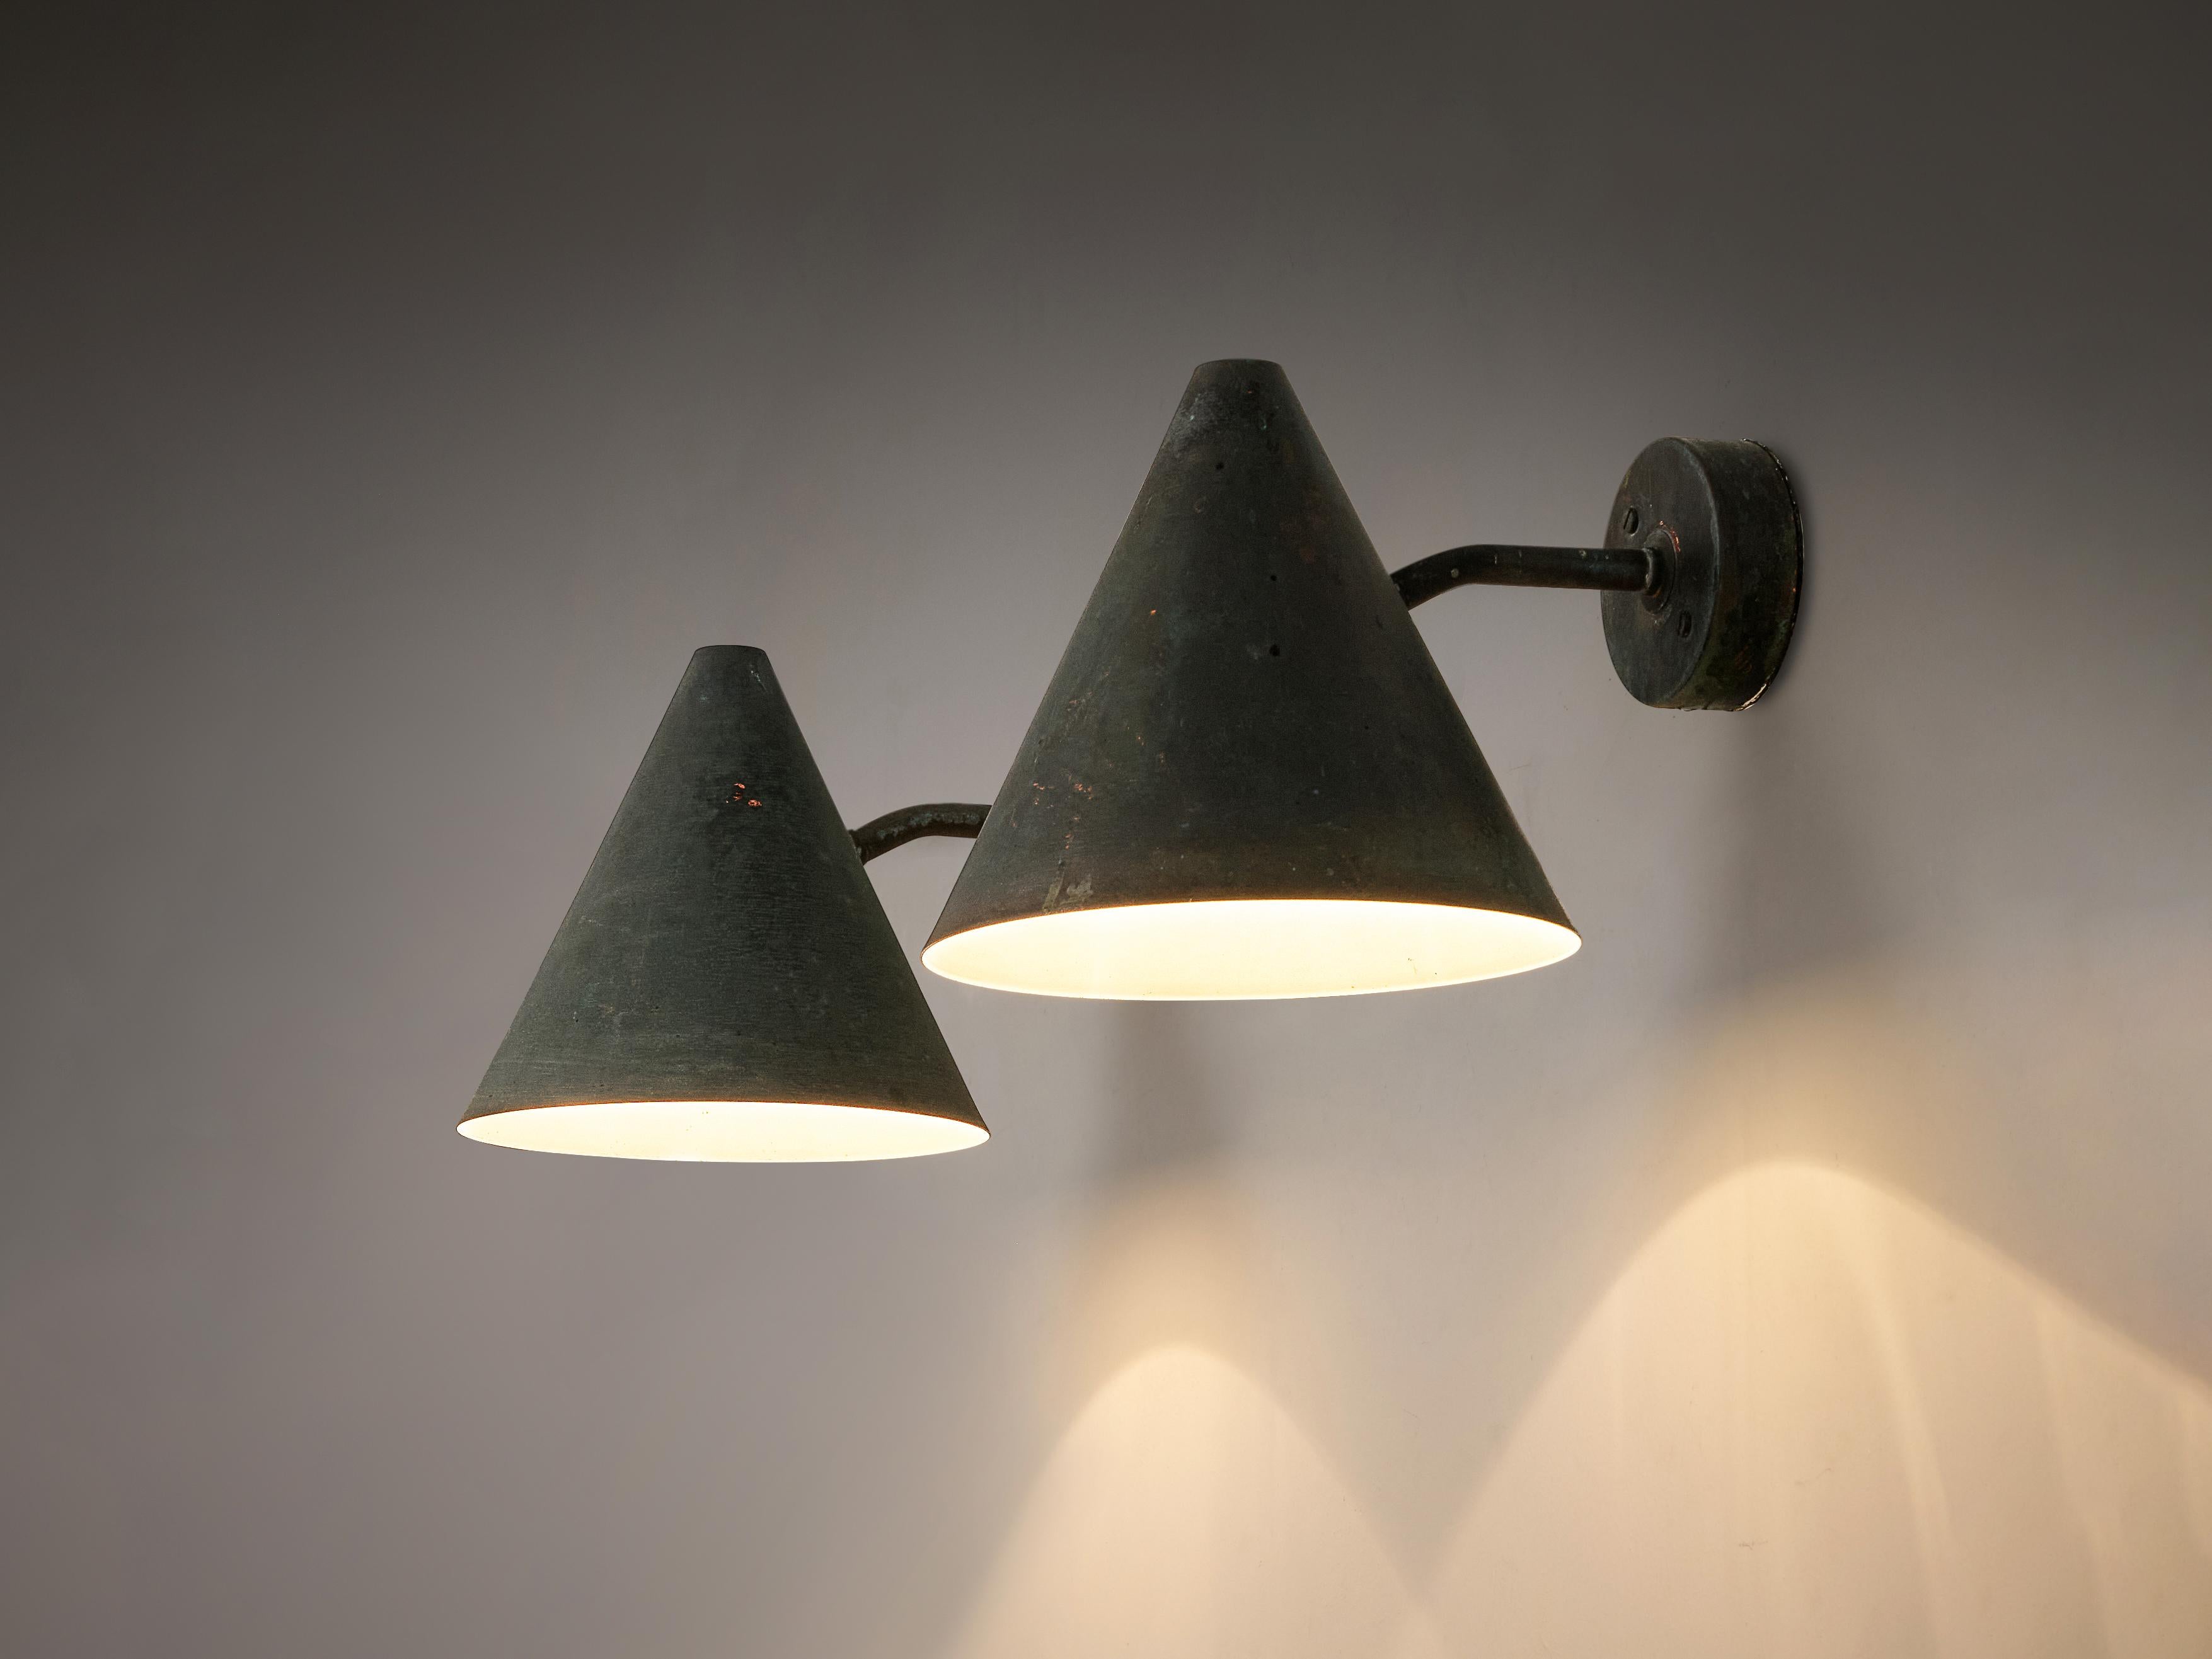 Hans-Agne Jakobsson for Hans-Agne Jakobsson AB in Markaryd, wall lights ‘Tratten’, copper, Sweden, 1950s

Hans-Agne Jakobsson designed this wall light 'Tratten', which is crafted from green copper. The conical-shaped shade is secured to a slightly